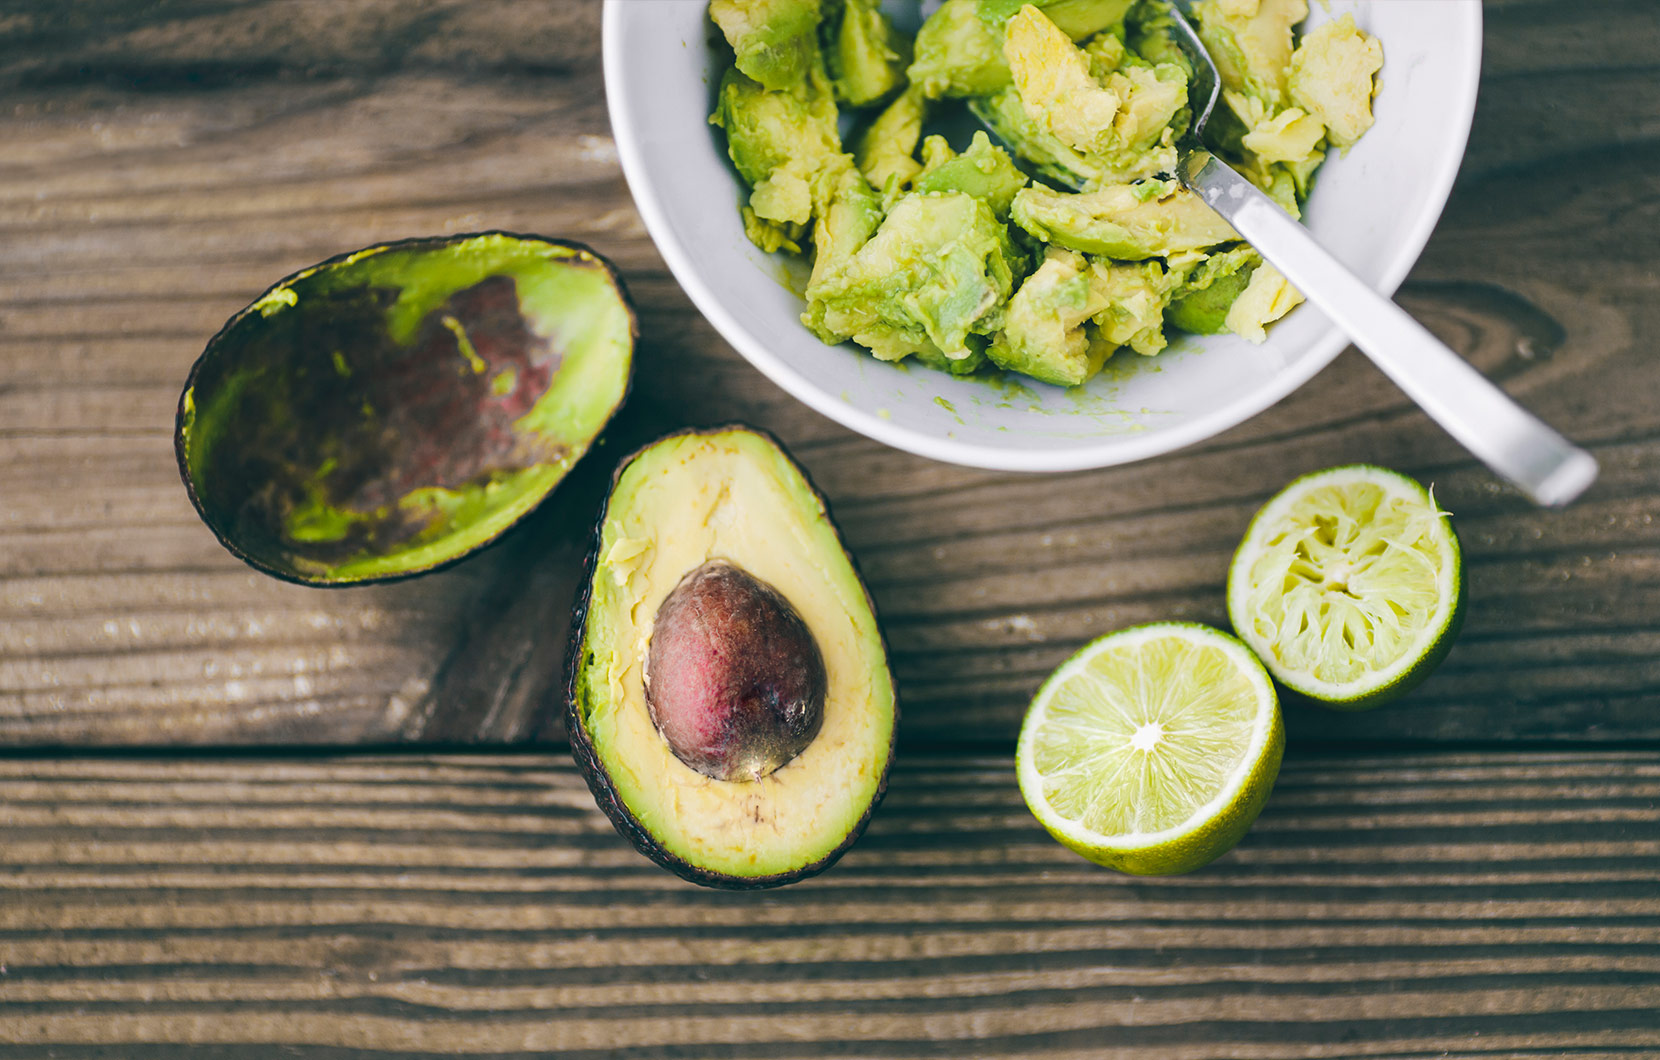 Learn the secrets to the perfect guacamole recipe with the Top Chef Jr. 